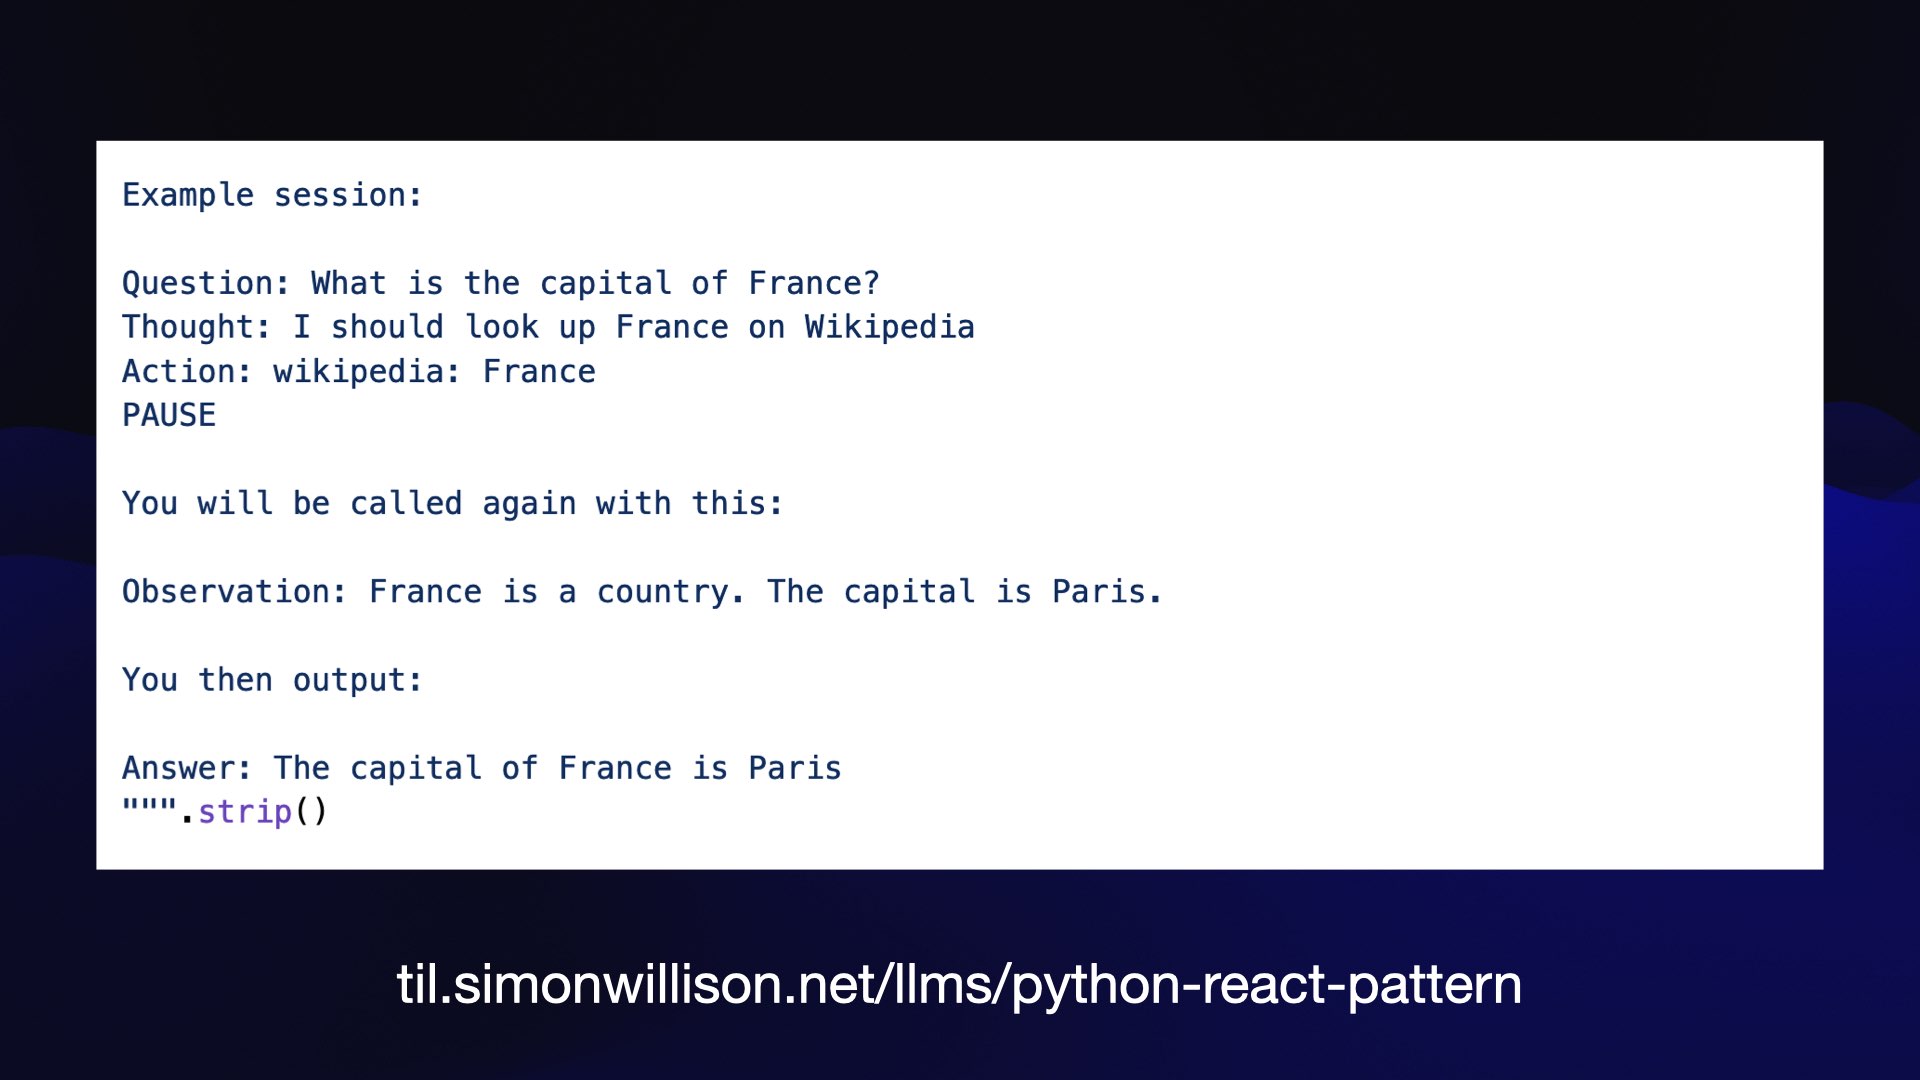 Example session:  Question: What is the capital of France?  Thought: I should look up France on Wikipedia  Action: wikipedia: France  PAUSE  You will be called again with this:  Observation: France is a country. The capital is Paris.  You then output:  Answer: The capital of France is Paris  llllll. 3 () til.simonwillison.net/lims/python-react-pattern 